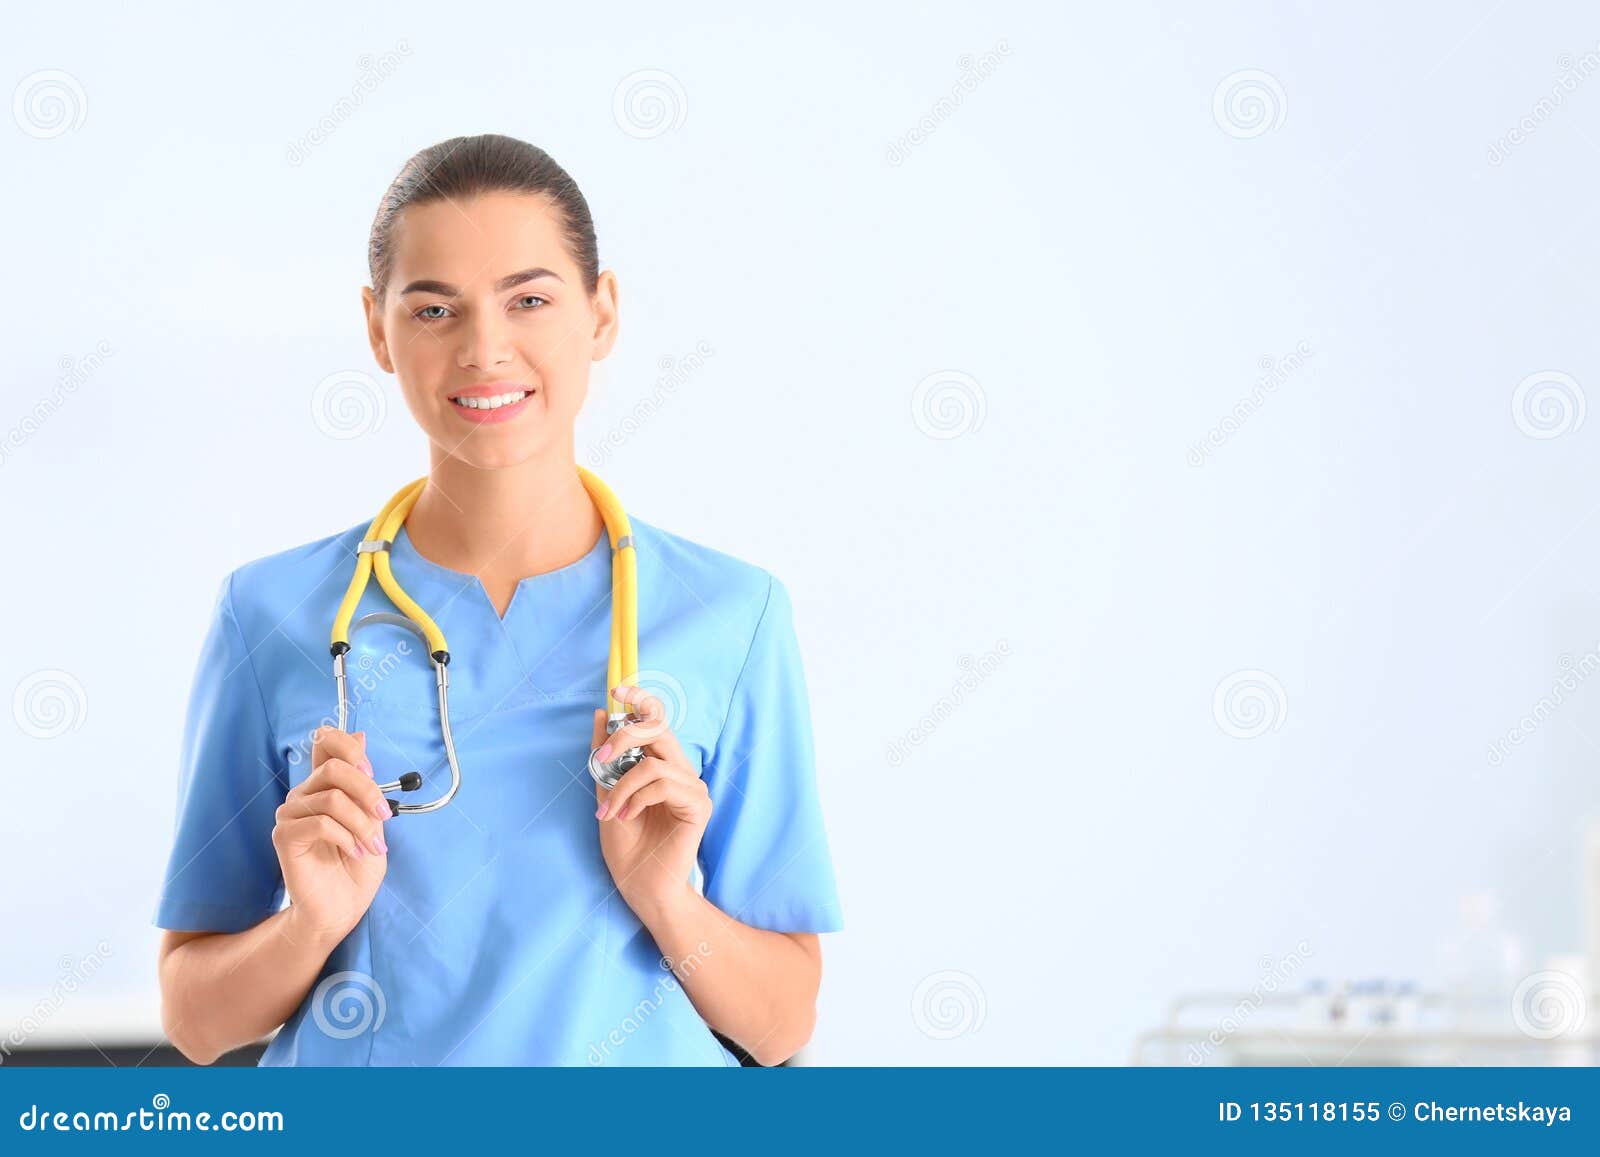 portrait of young medical assistant with stethoscope in hospital.